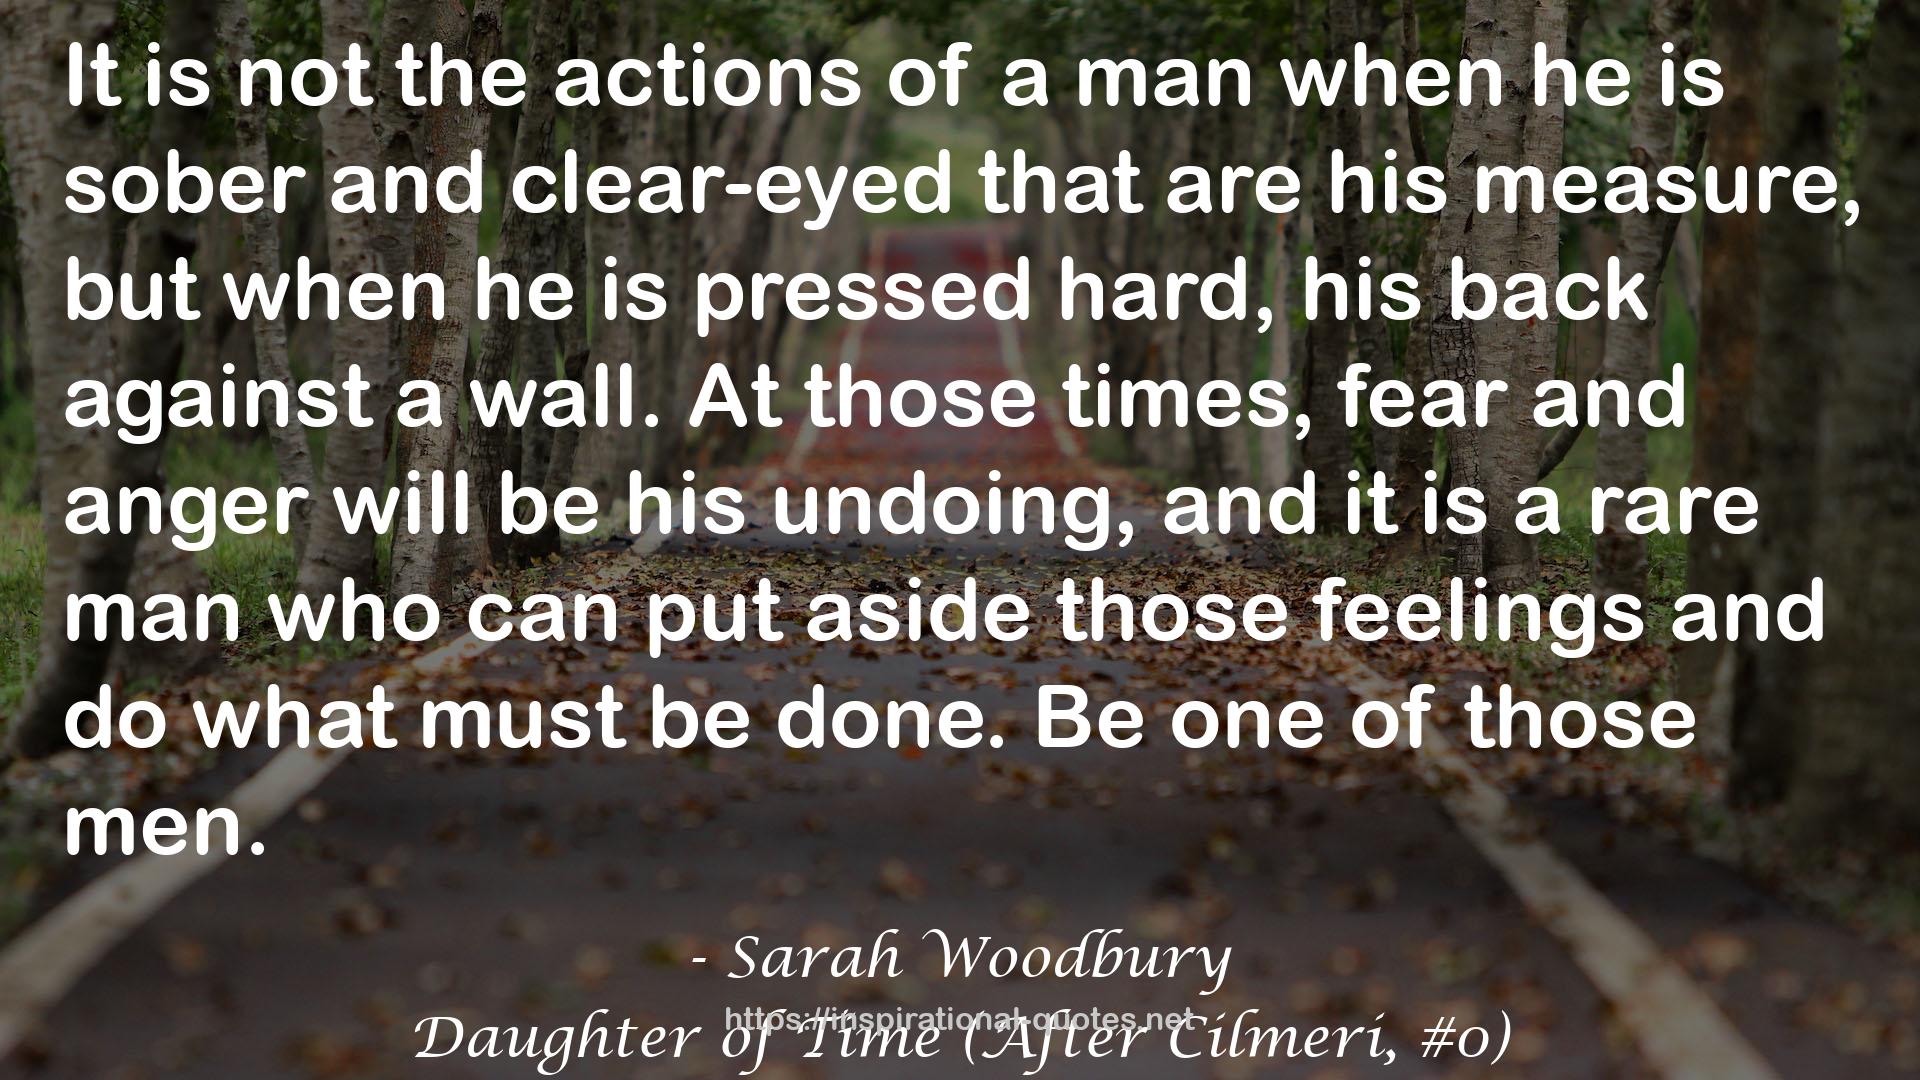 Daughter of Time (After Cilmeri, #0) QUOTES